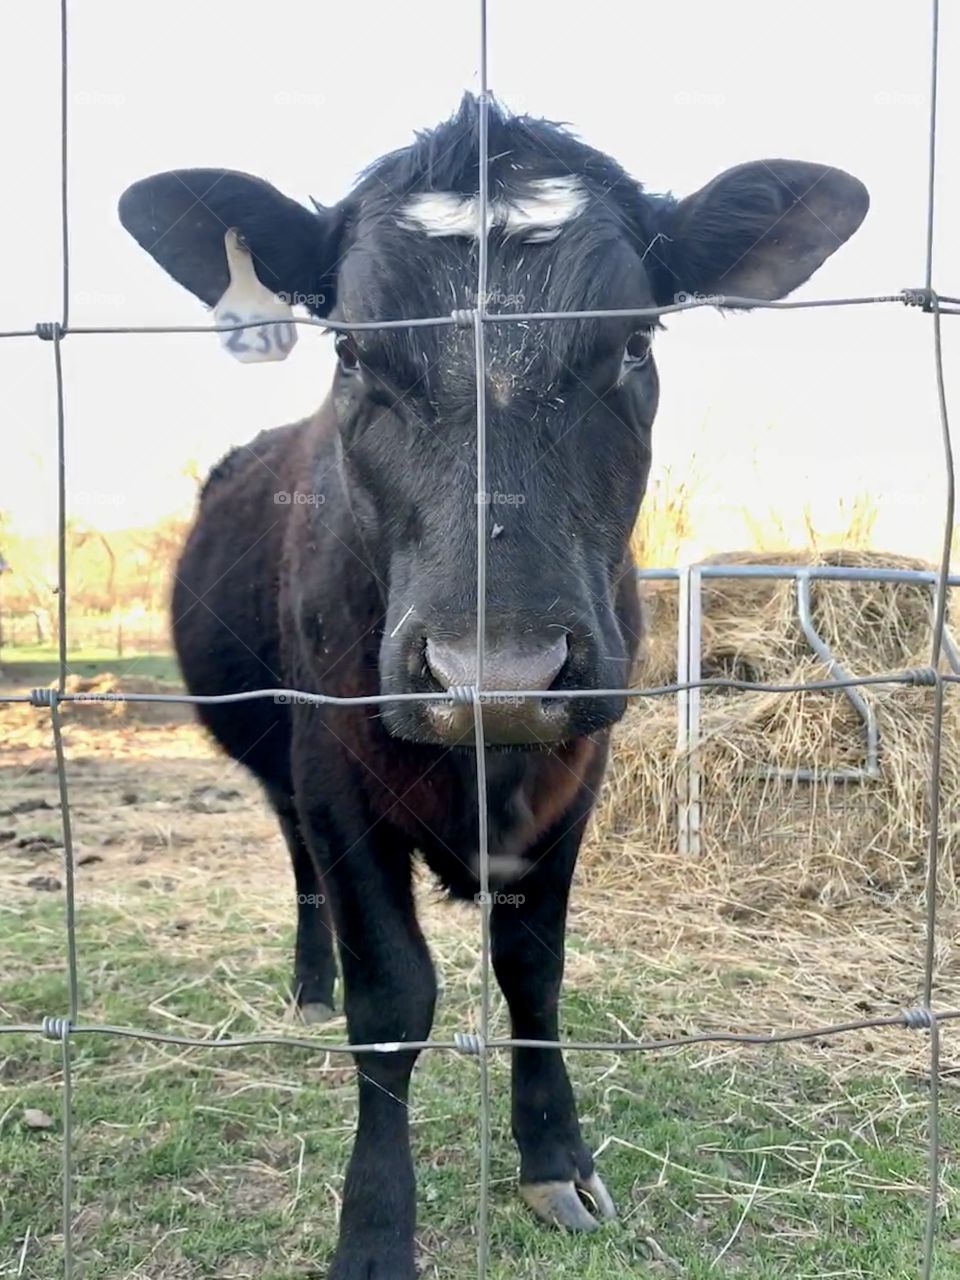 A young black heifer looking through a wire fence